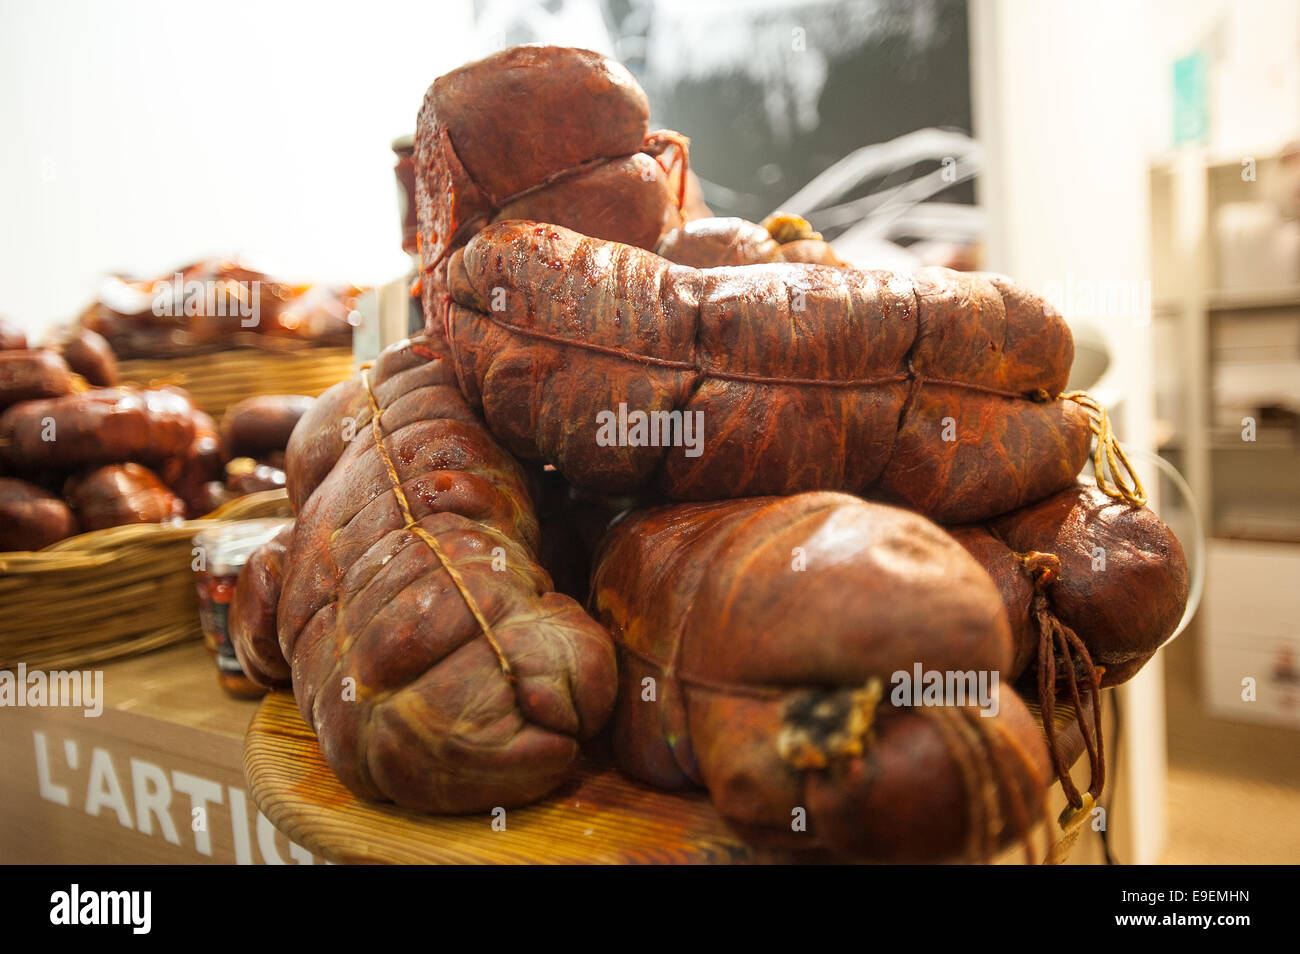 Turin, Italie. 26Th Oct, 2014. Italie Piémont Salone del Gusto e Terra Madre - Torino Lingotto - 23/27 octobre 2014 - Stand - N'DCalabre régional Crédit : uja Realy Easy Star/Alamy Live News Banque D'Images